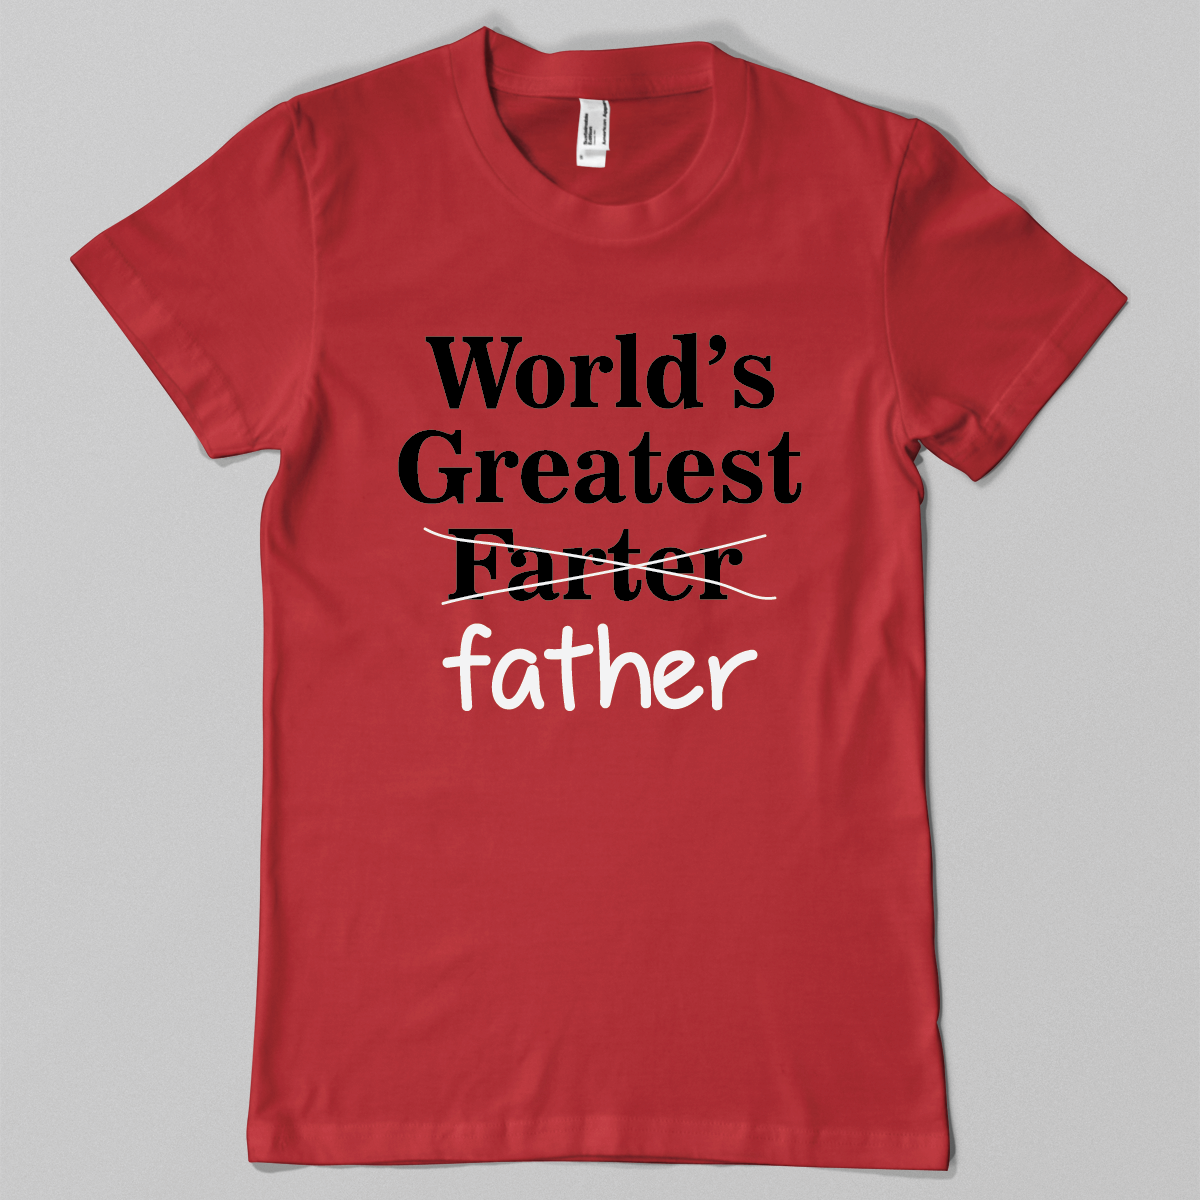 World's Greatest Farter... Father